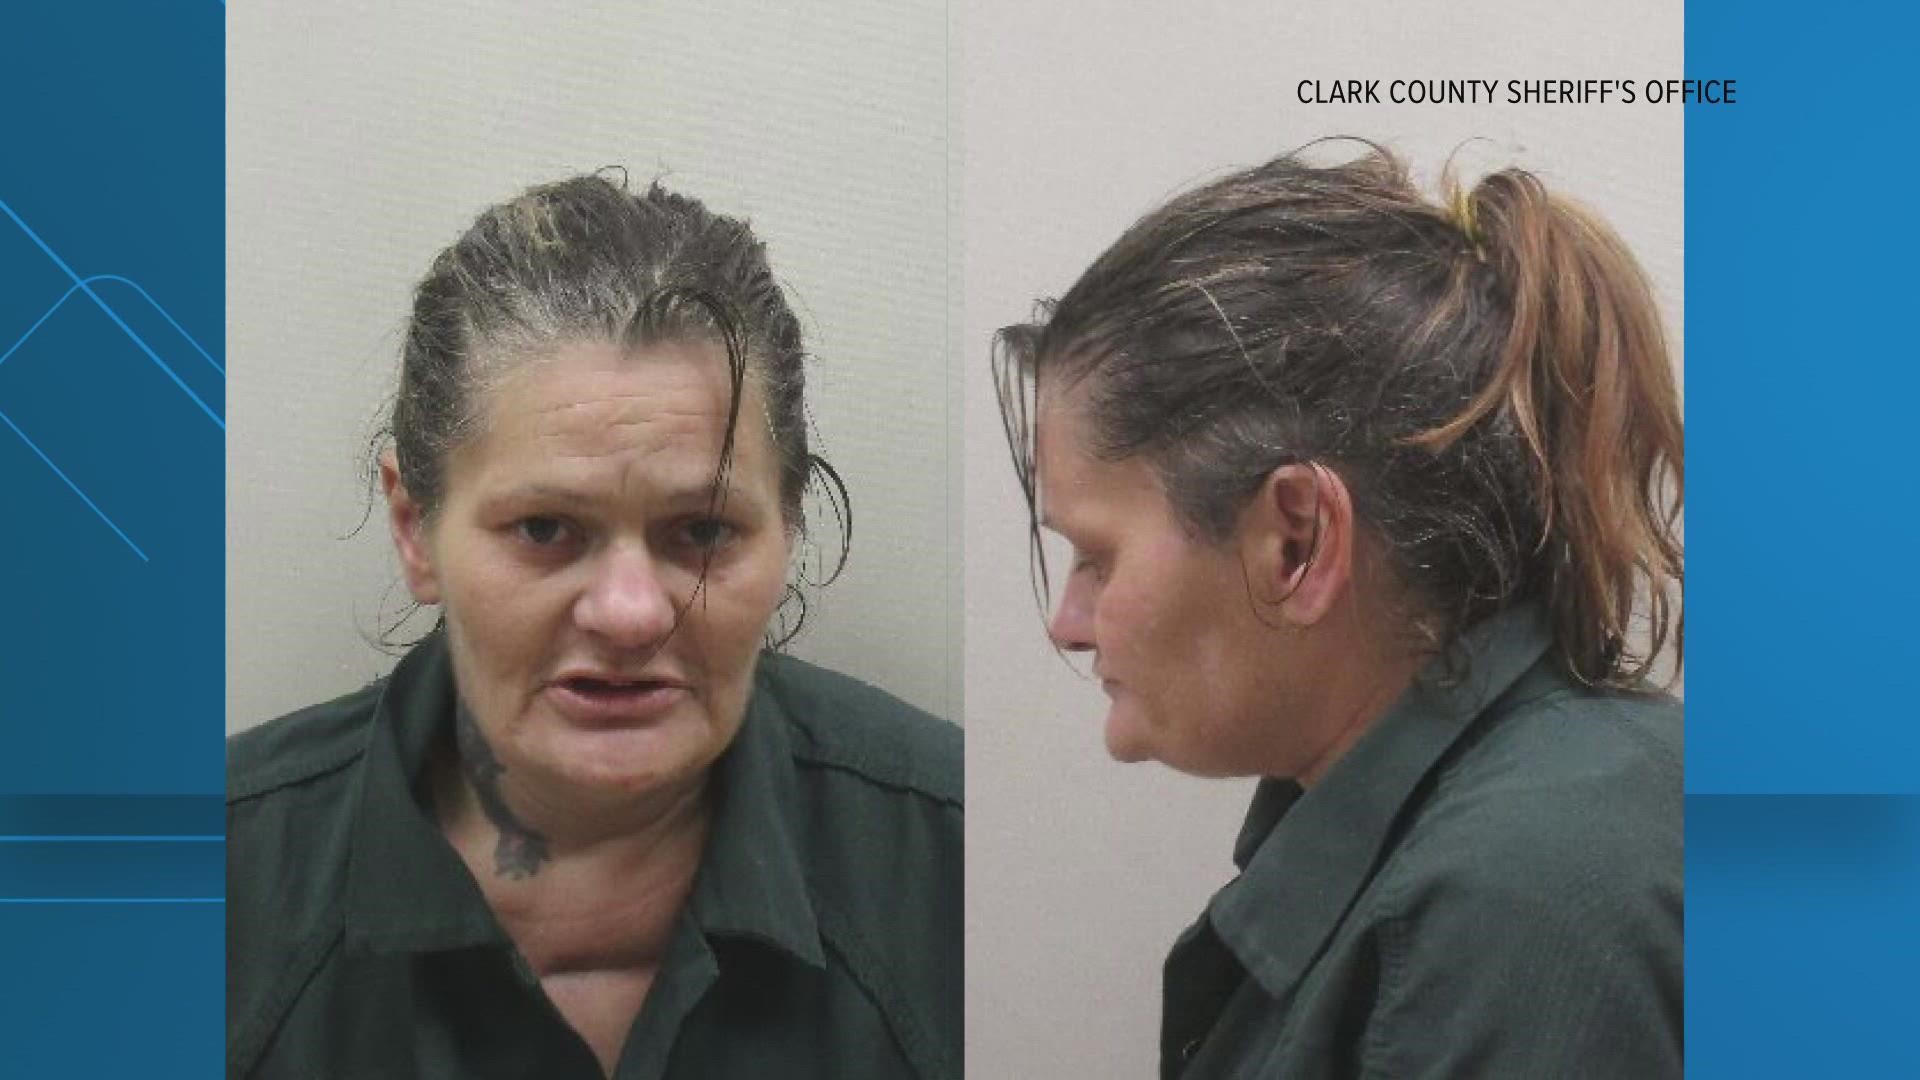 Police say Lori Phillipy is in custody after a police pursuit that began in Floyd County and ended in Clark County Sunday.